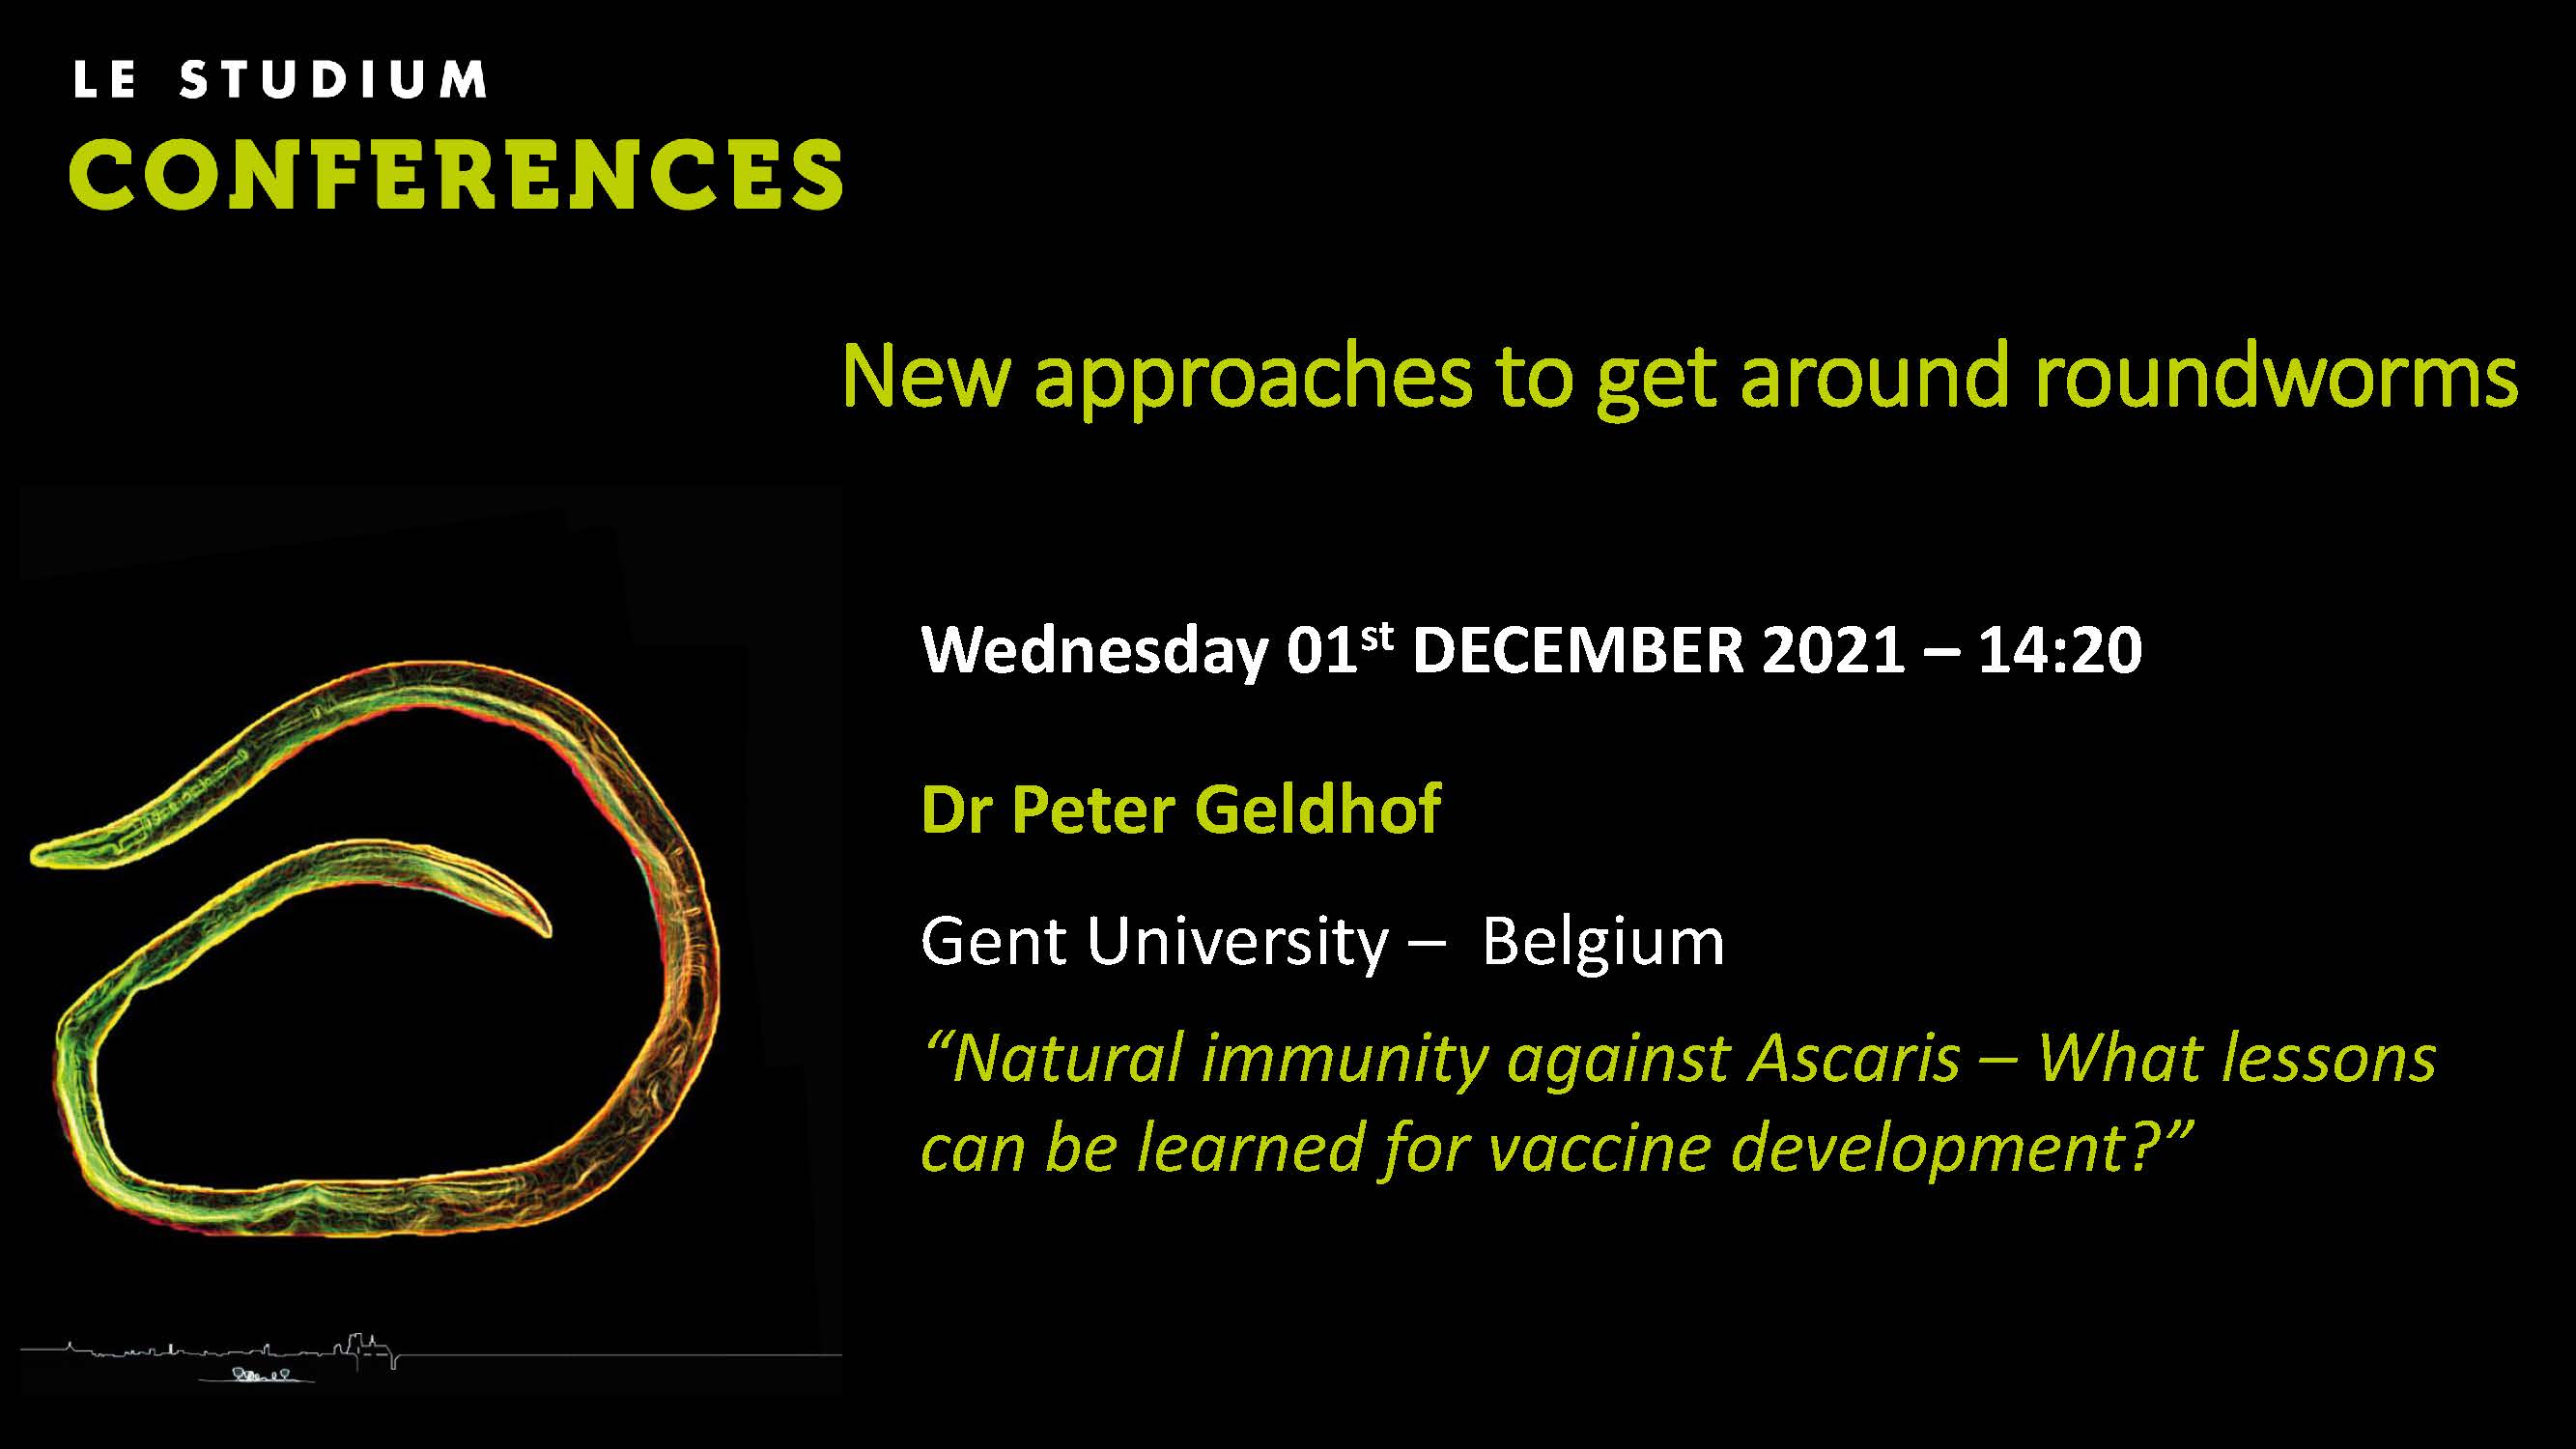 Dr Peter Geldhof - Natural immunity against Ascaris – What lessons can be learned for vaccine development?